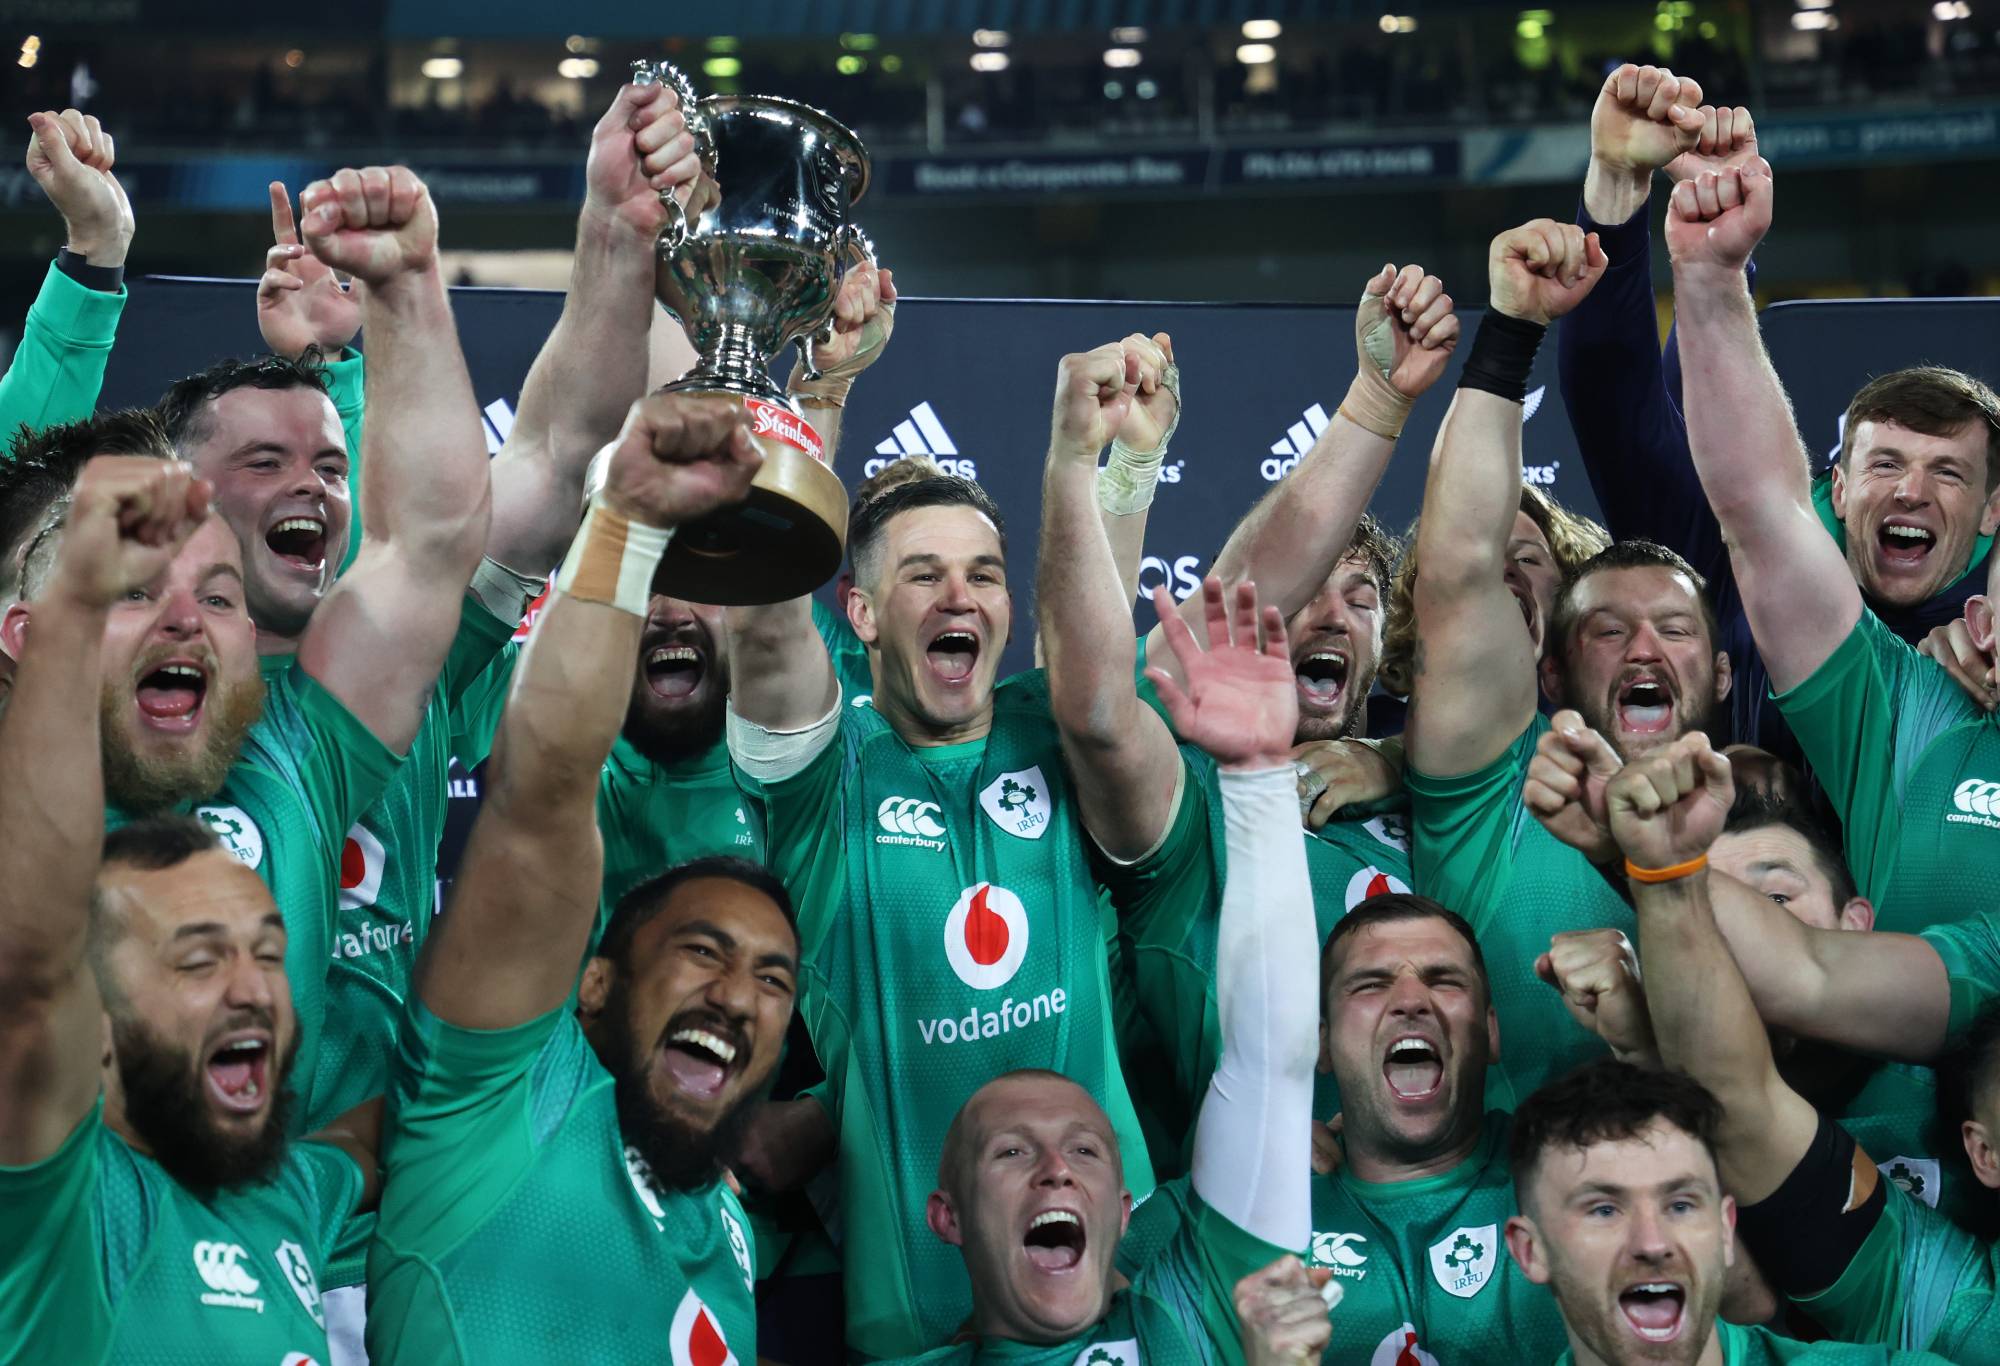 Johnny Sexton, caption of Ireland (C) and the team celebrate during the International Test match between the New Zealand All Blacks and Ireland at Sky Stadium on July 16, 2022 in Wellington, New Zealand. (Photo by Phil Walter/Getty Images)